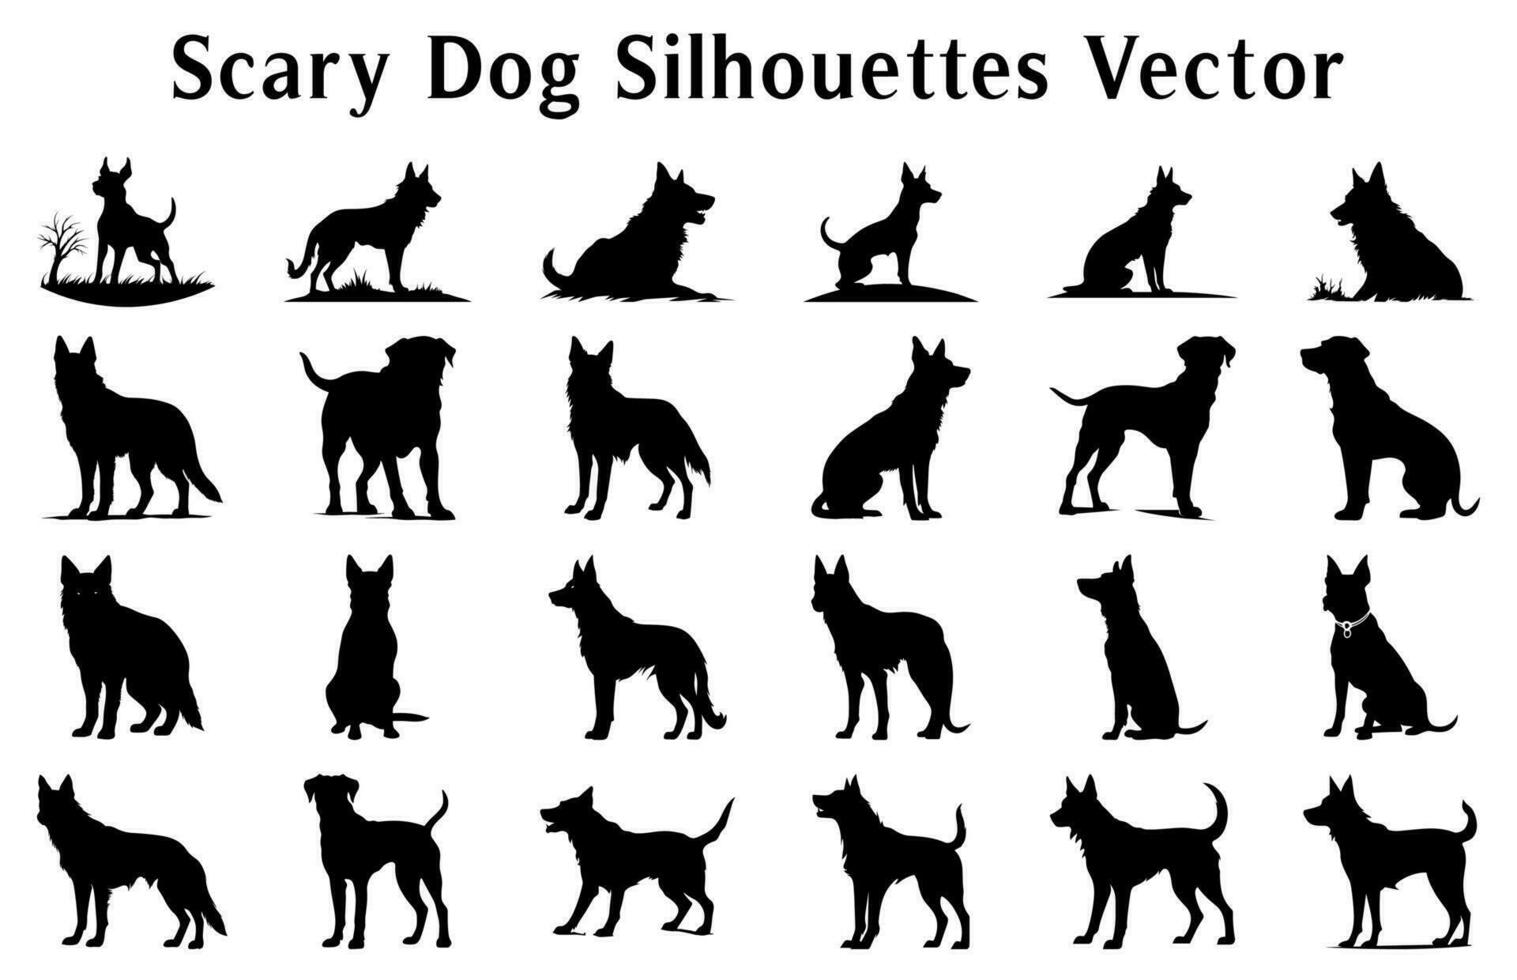 Halloween Scary Dog Vector Silhouettes bundle, Set of silhouettes Halloween evil black Dogs